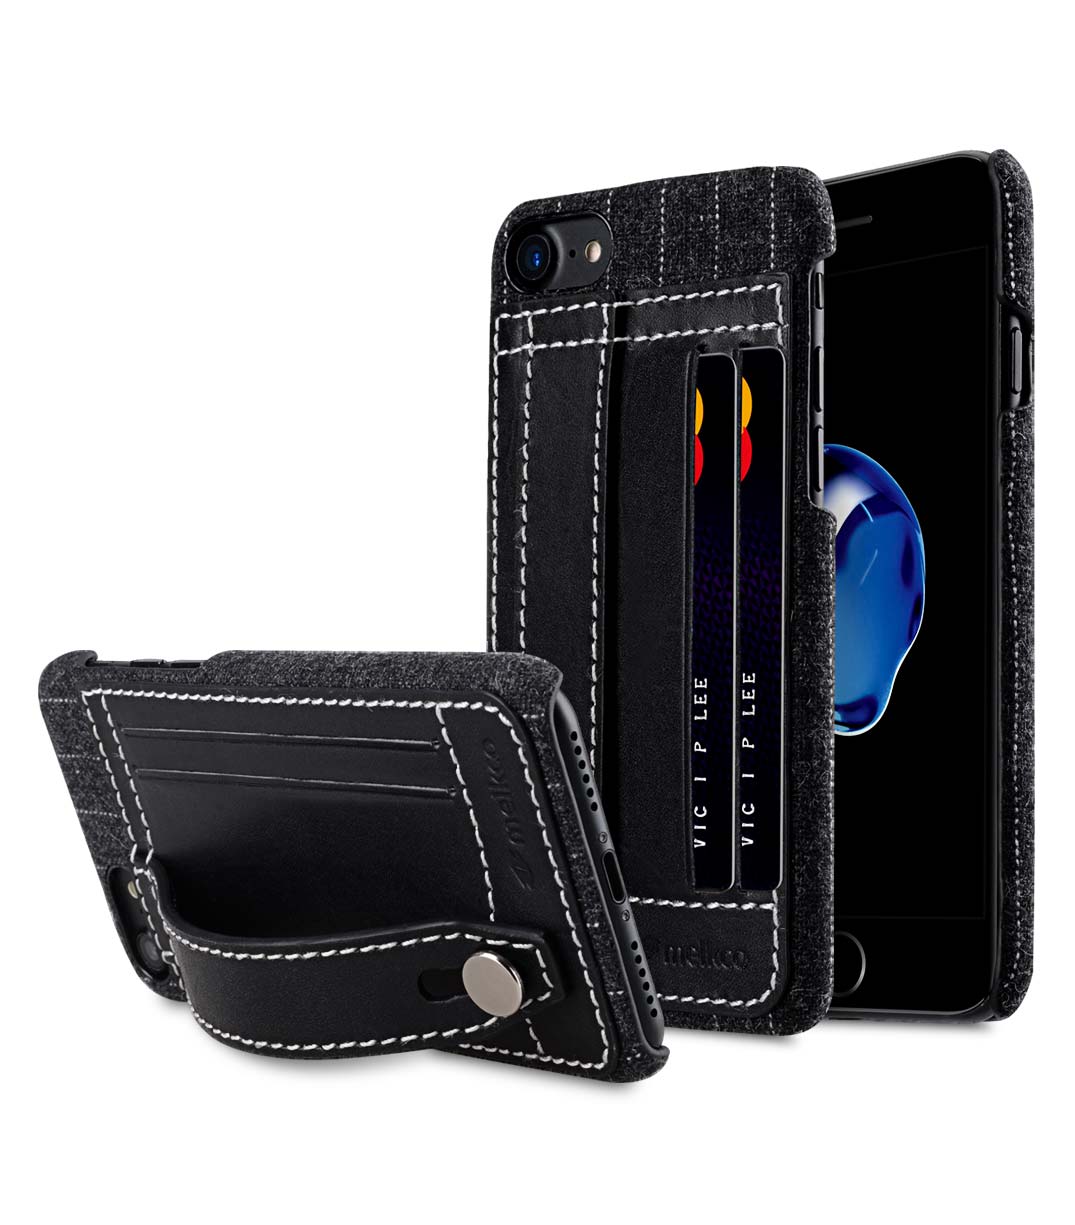 Melkco Holmes Series Heri Genuine Leather Dual Card slot with stand Case for Apple iPhone 7 / 8 (4.7") - (Black)